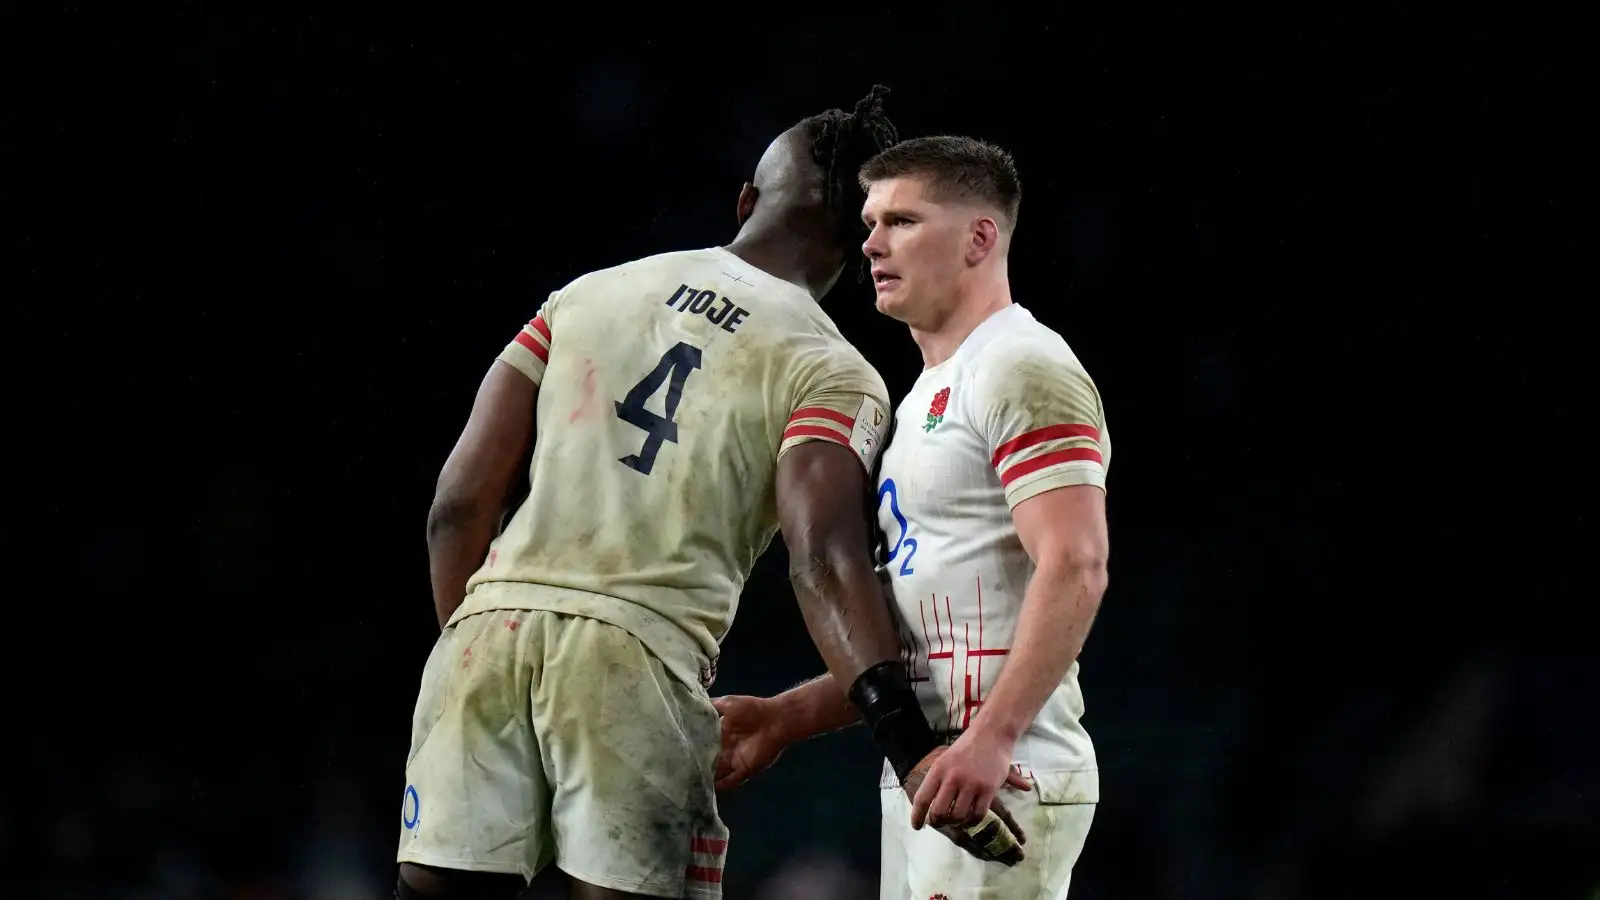 England's Owen Farrell, right, with teammate Maro Itoje at the end of the Six Nations rugby union international match between England and France, at Twickenham Stadium in London.